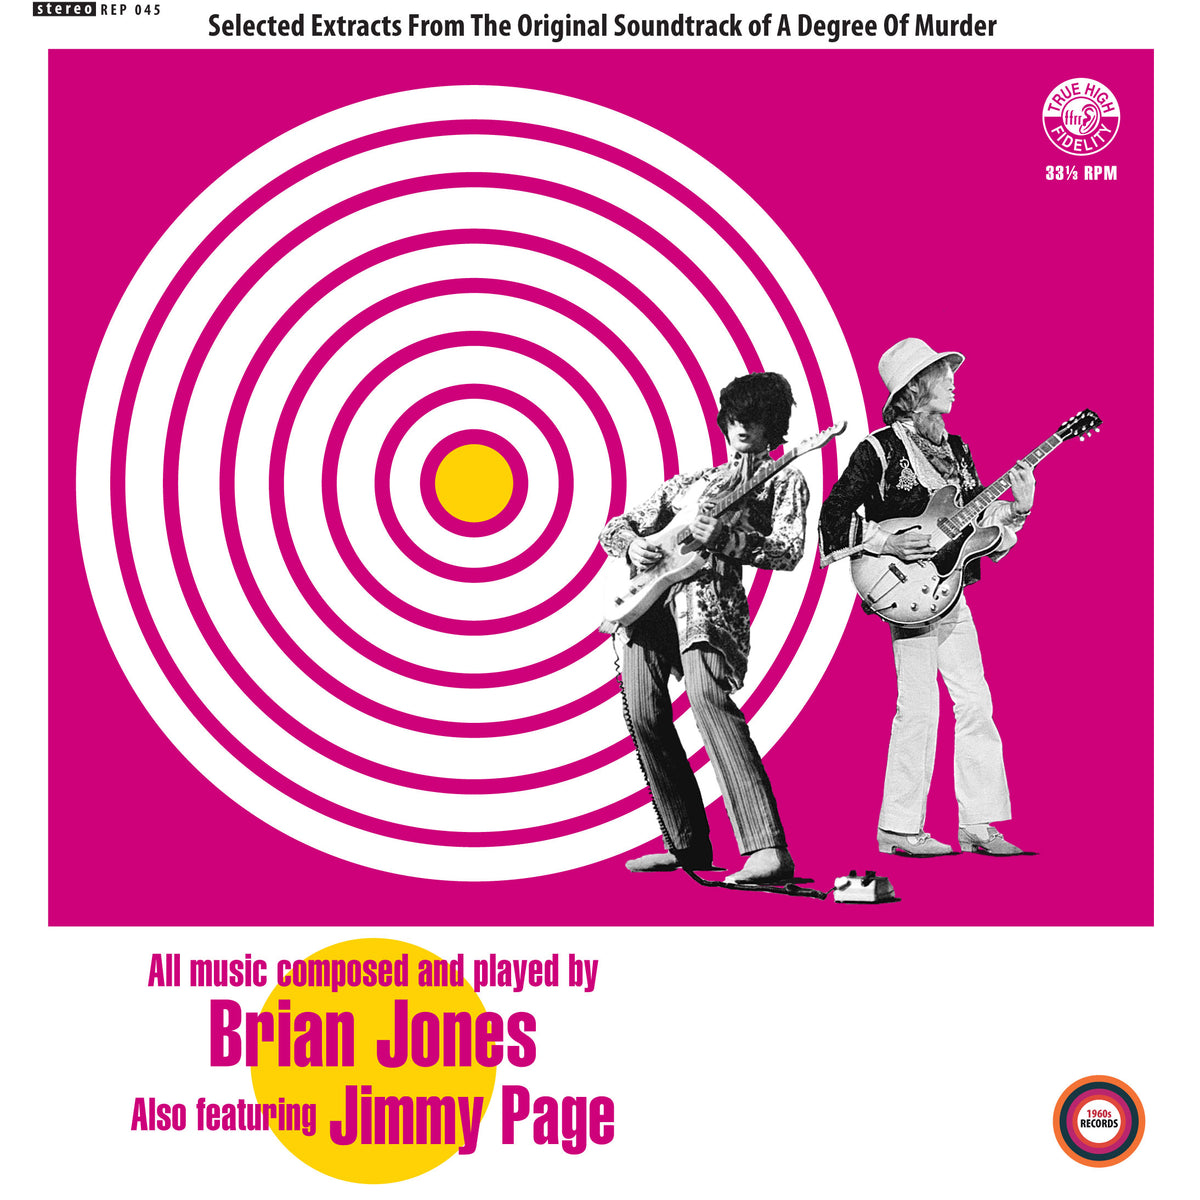 JONES BRIAN - FEATURING JIMMY PAGE - (SELECTED EXTRACTS FROM THE ORIGINAL SOUNDTRACK OF) A DEGREE OF MURDER'